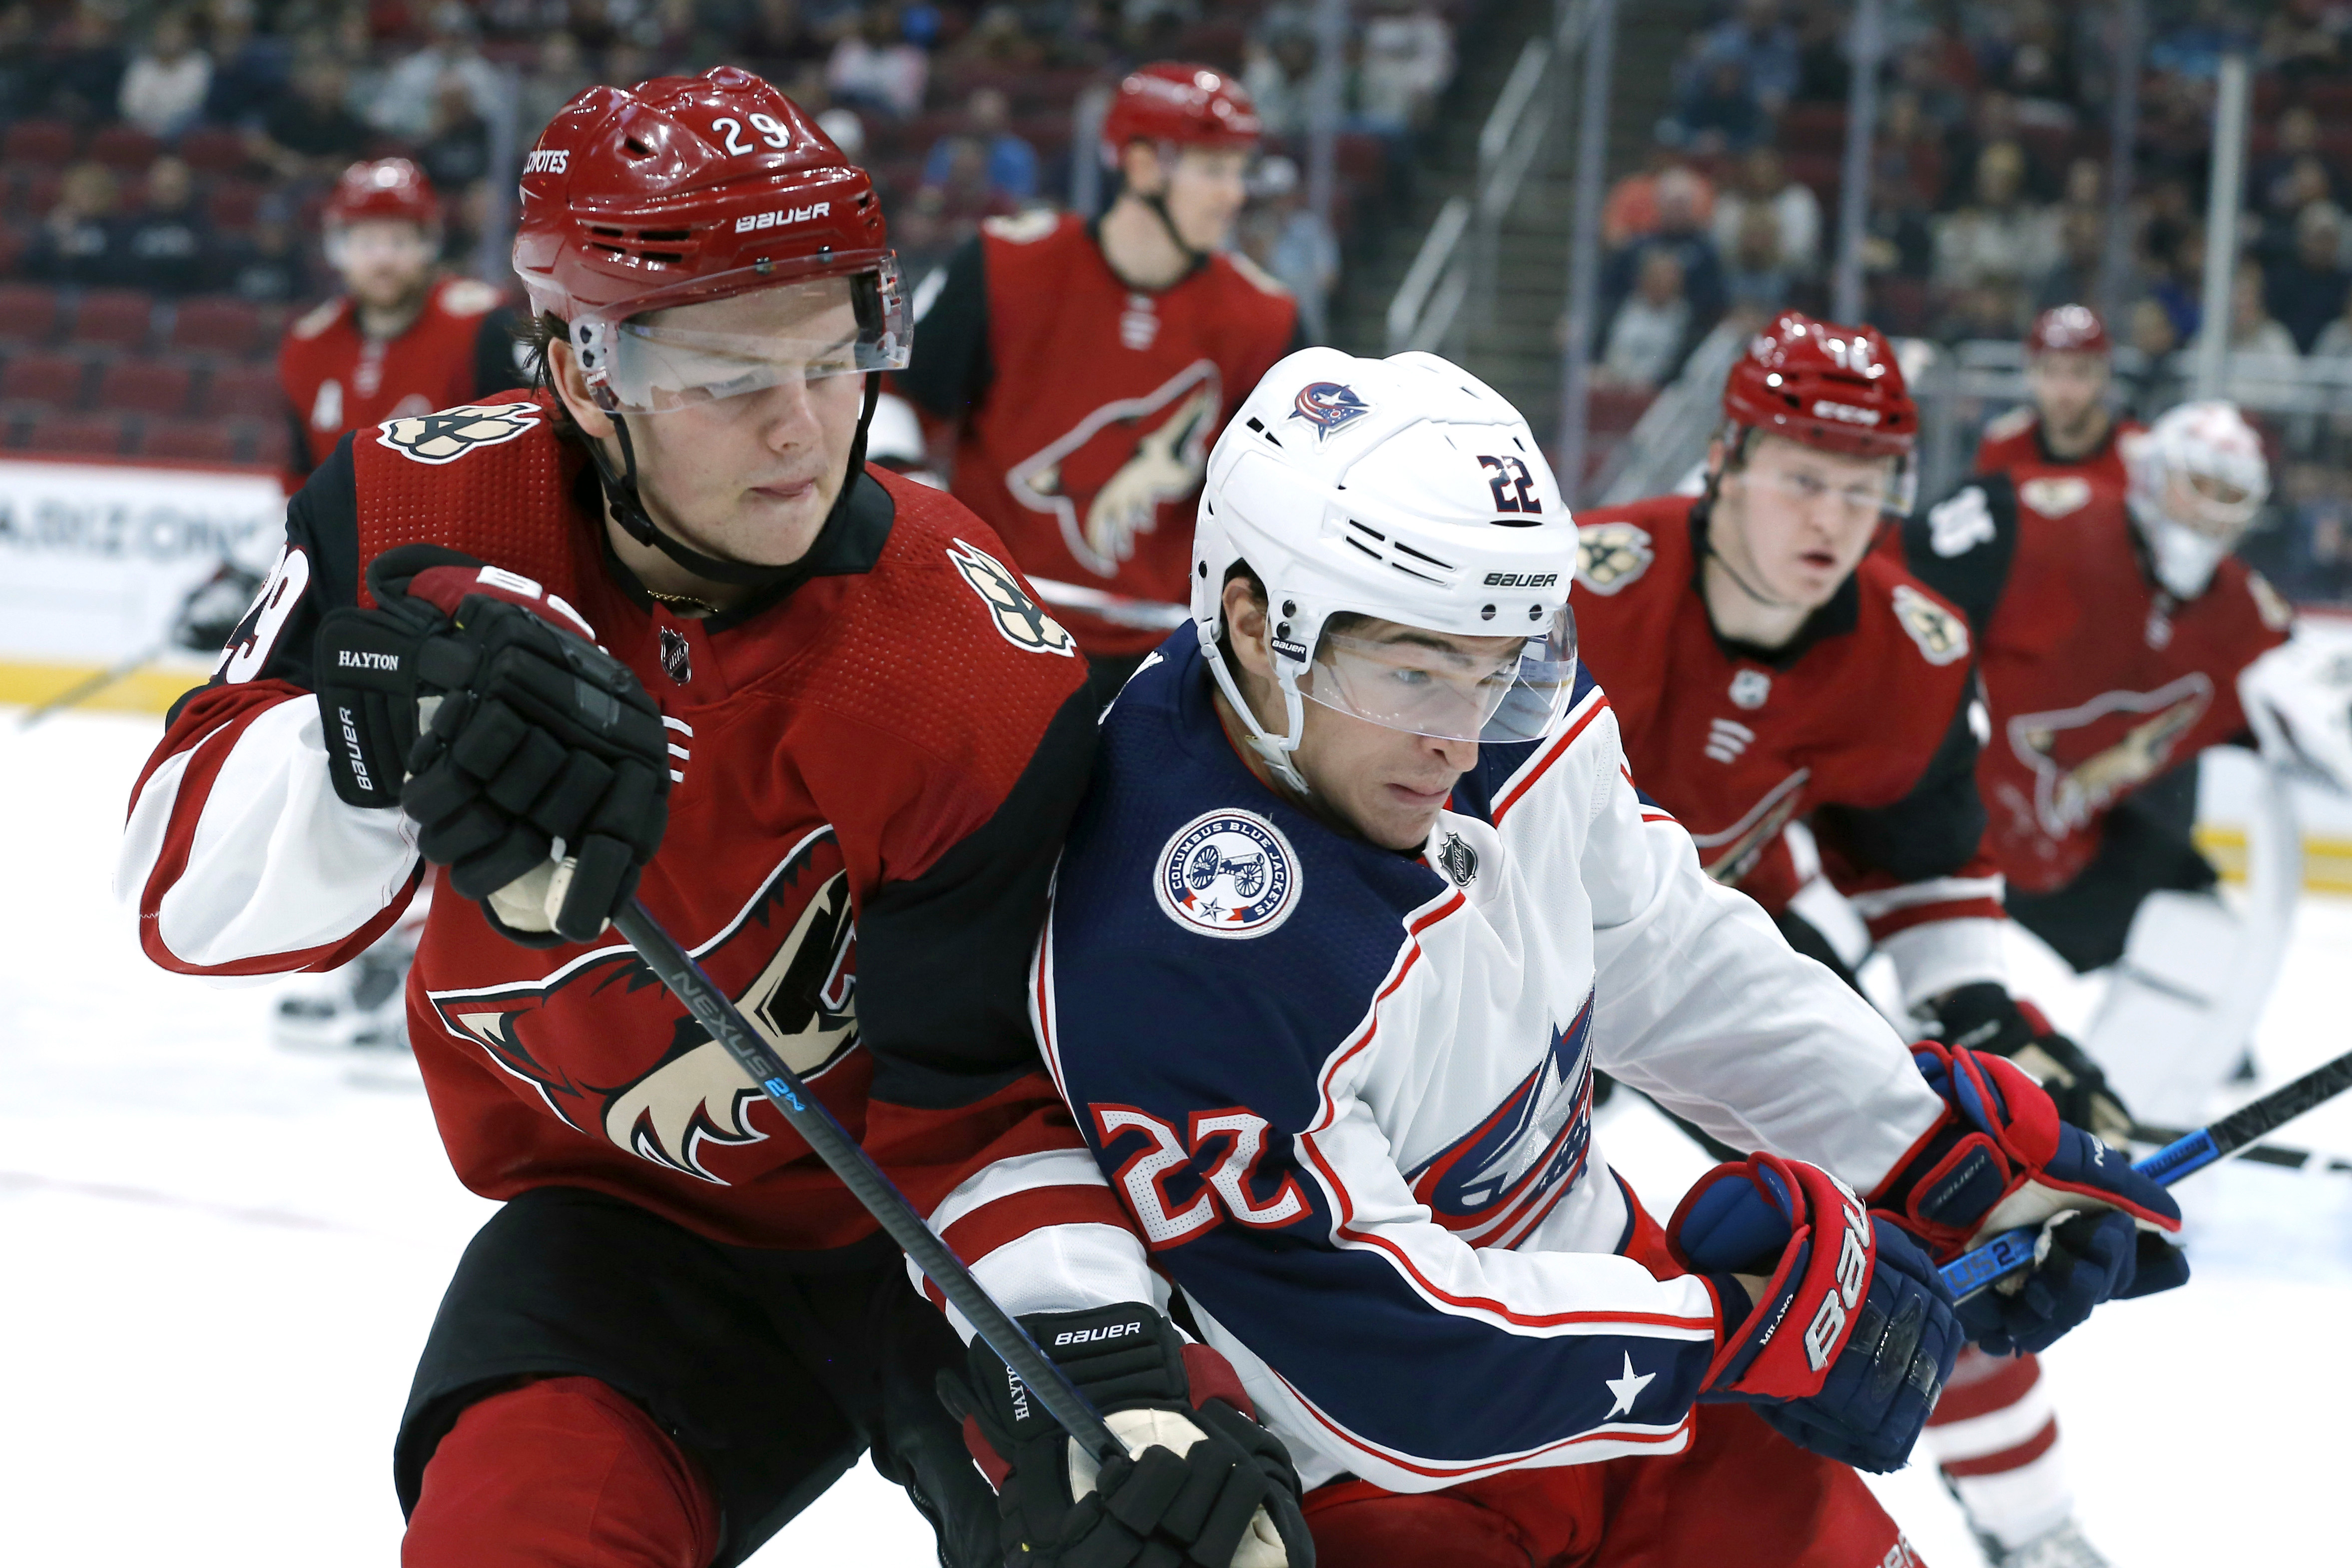 Blue Jackets end 5-game skid with 3-2 win over Coyotes